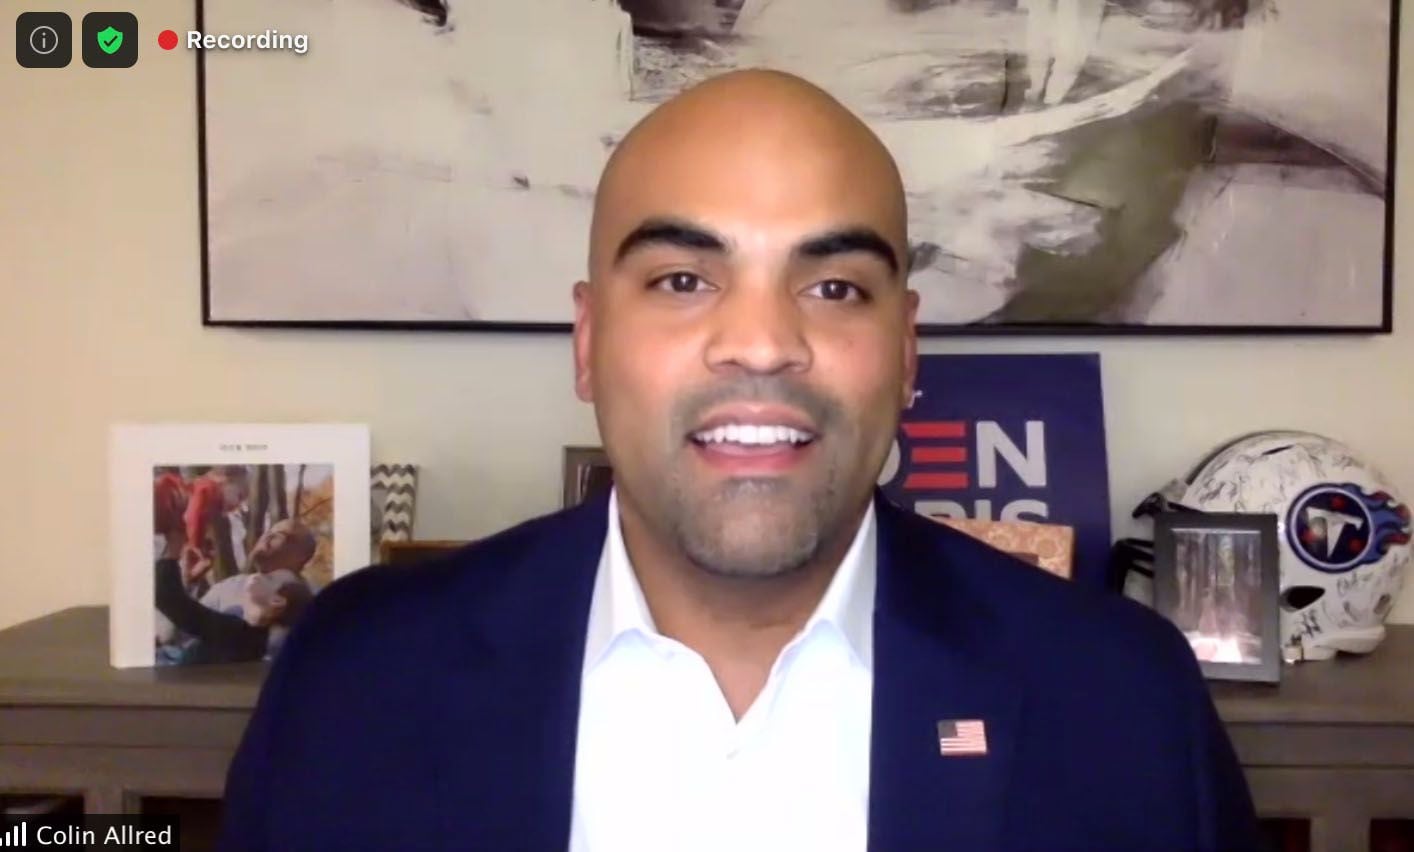 U.S. Rep. Colin Allred, D-Dallas, said his party is "only going to be successful by appealing to the broadest segment of the country.”